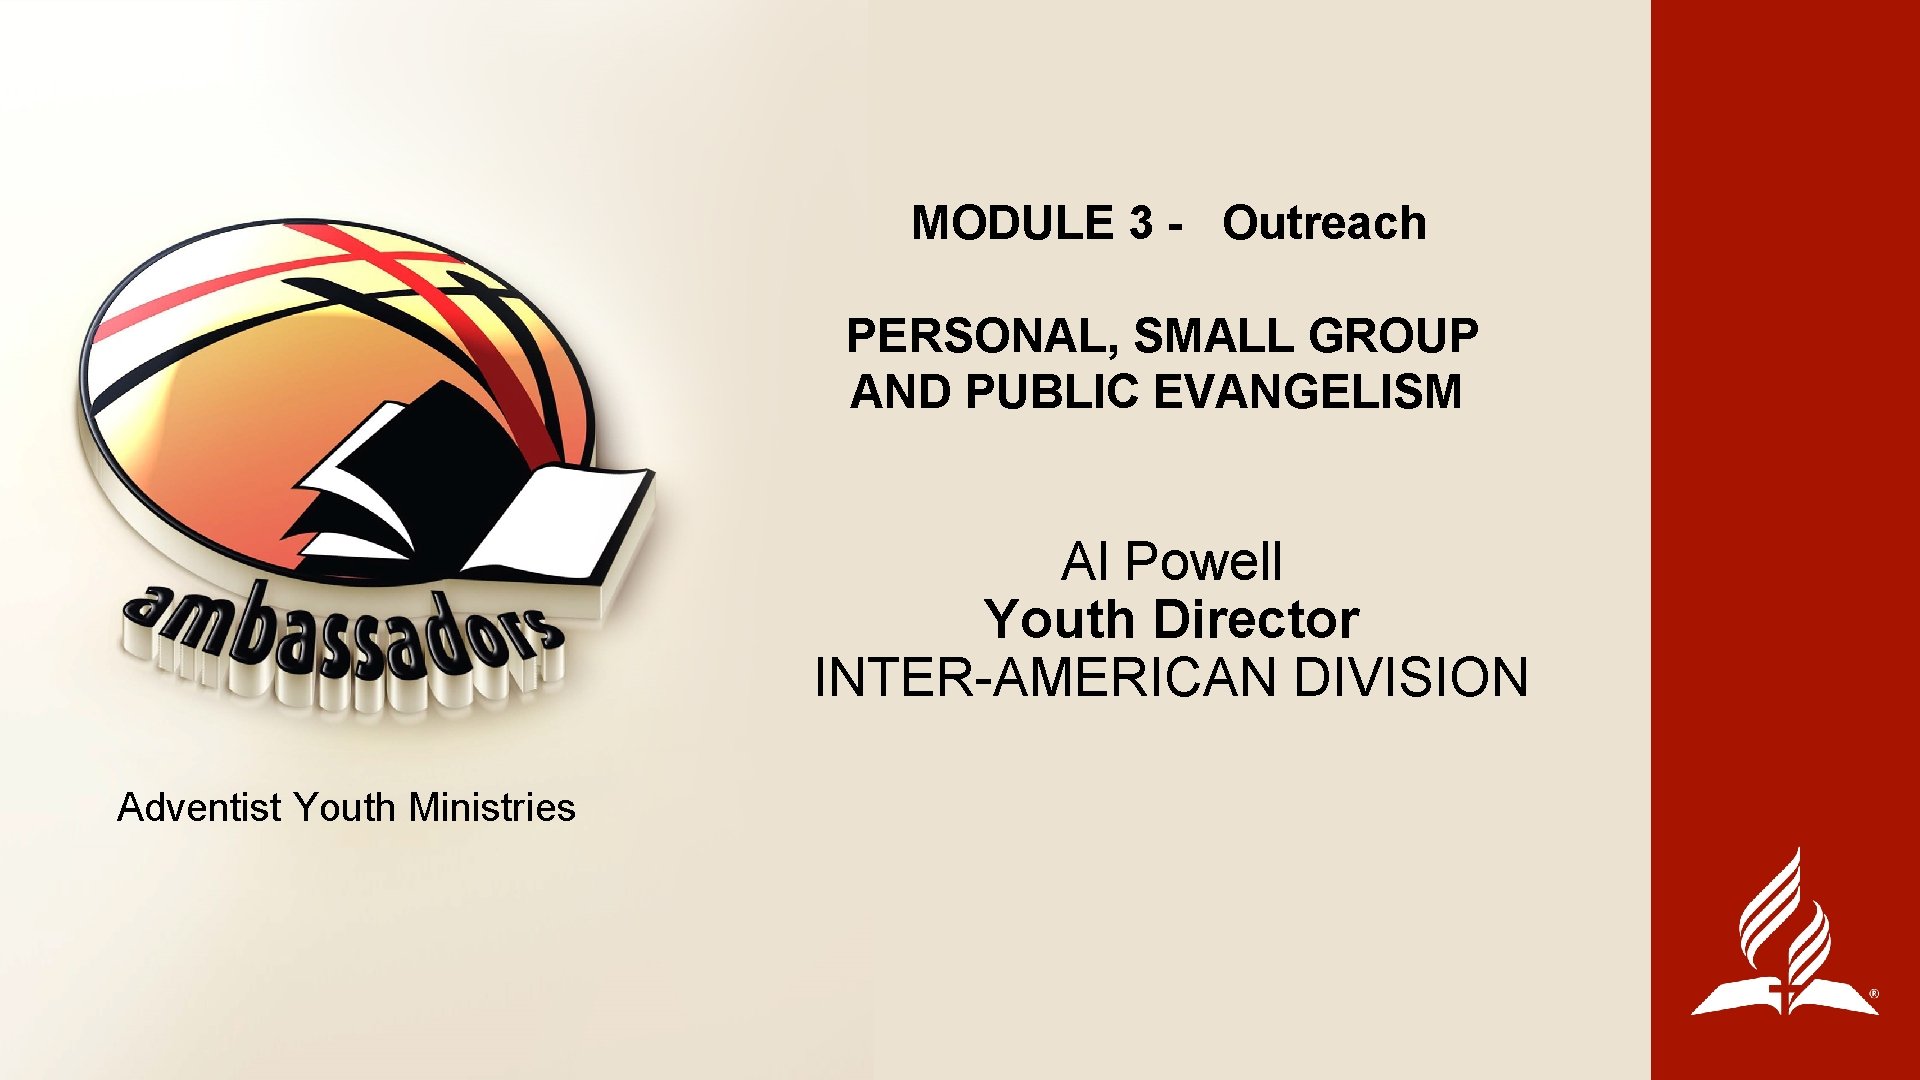 MODULE 3 - Outreach PERSONAL, SMALL GROUP AND PUBLIC EVANGELISM Al Powell Youth Director